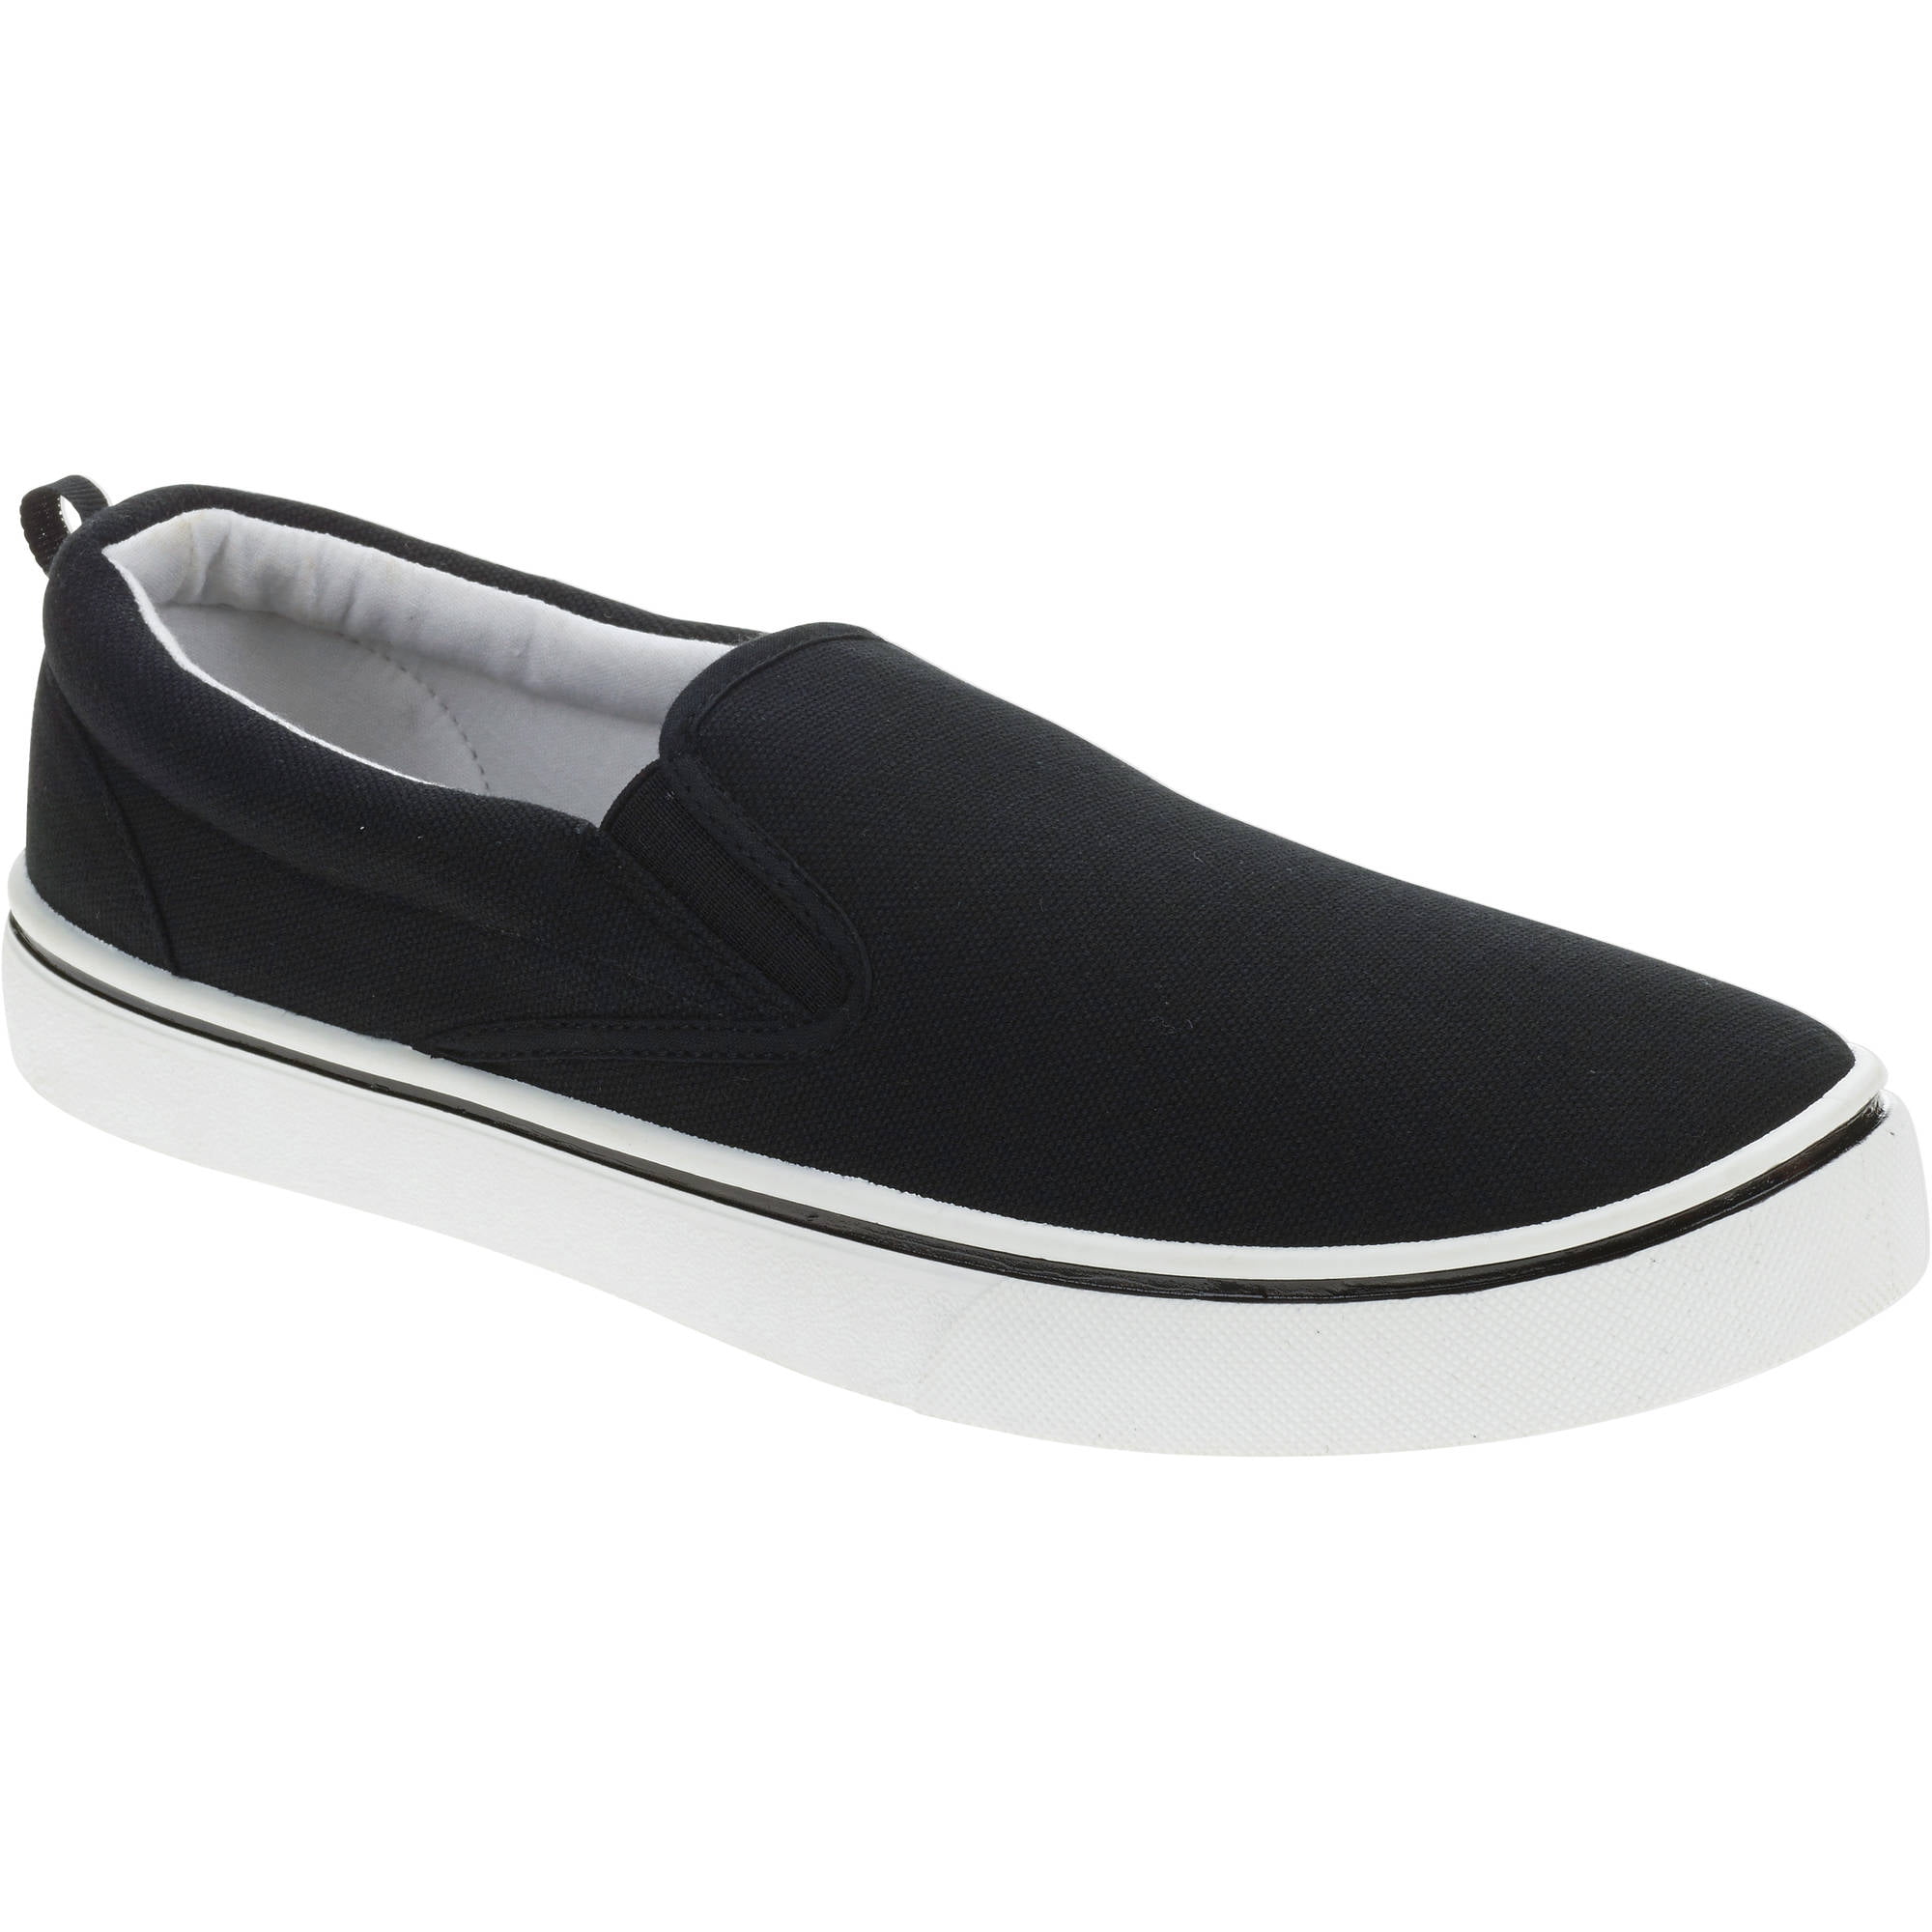 slip on white canvas sneakers